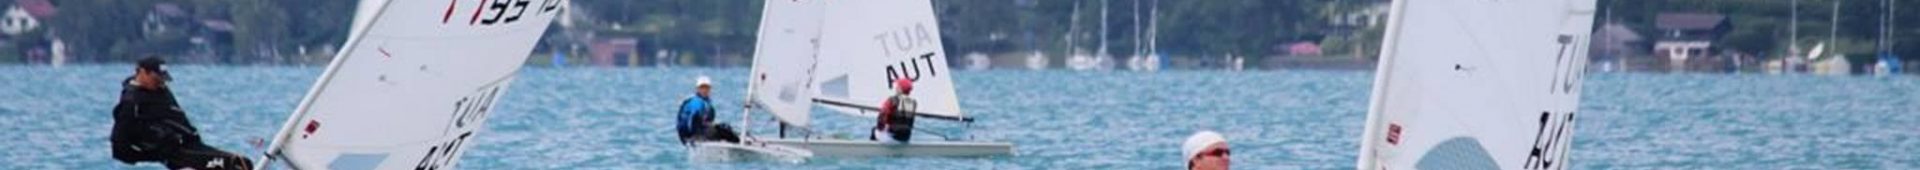 49erFX Austrian Championships Olympic Classes